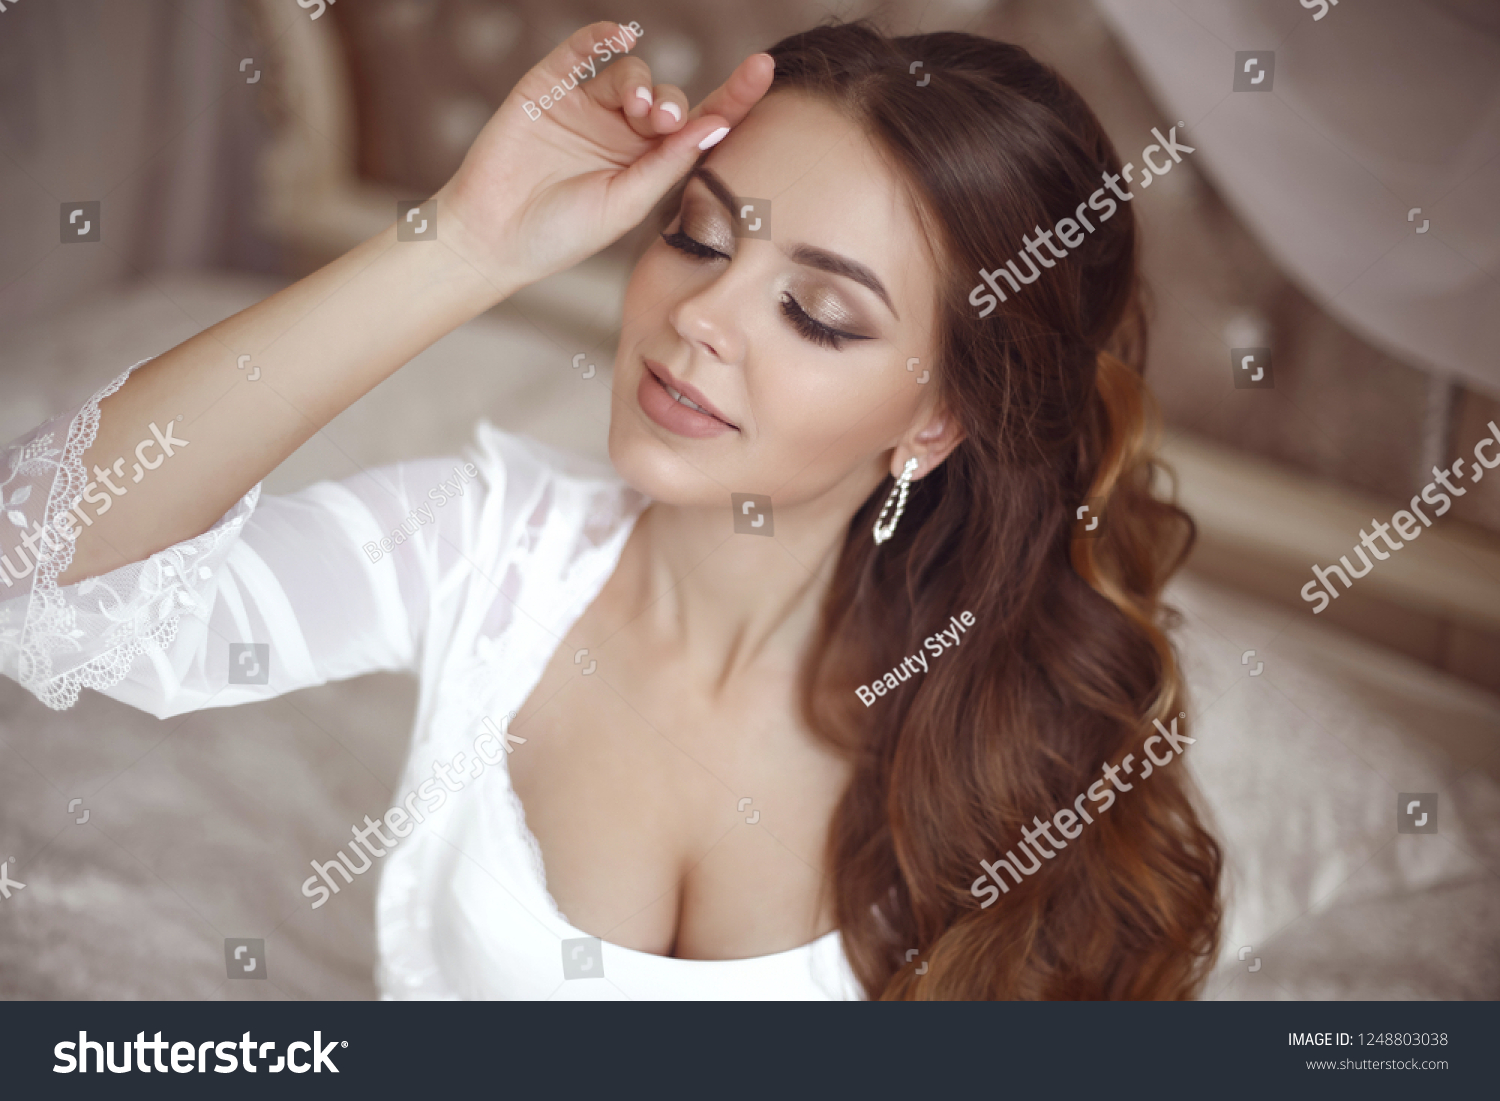 Beautiful sensual Bride wedding Portrait. Beauty makeup and elegant hairstyle. Brunette with curly hair style wearing in white sexy boudoir dressing gown in bedroom. Eyeshadows closeup. #1248803038